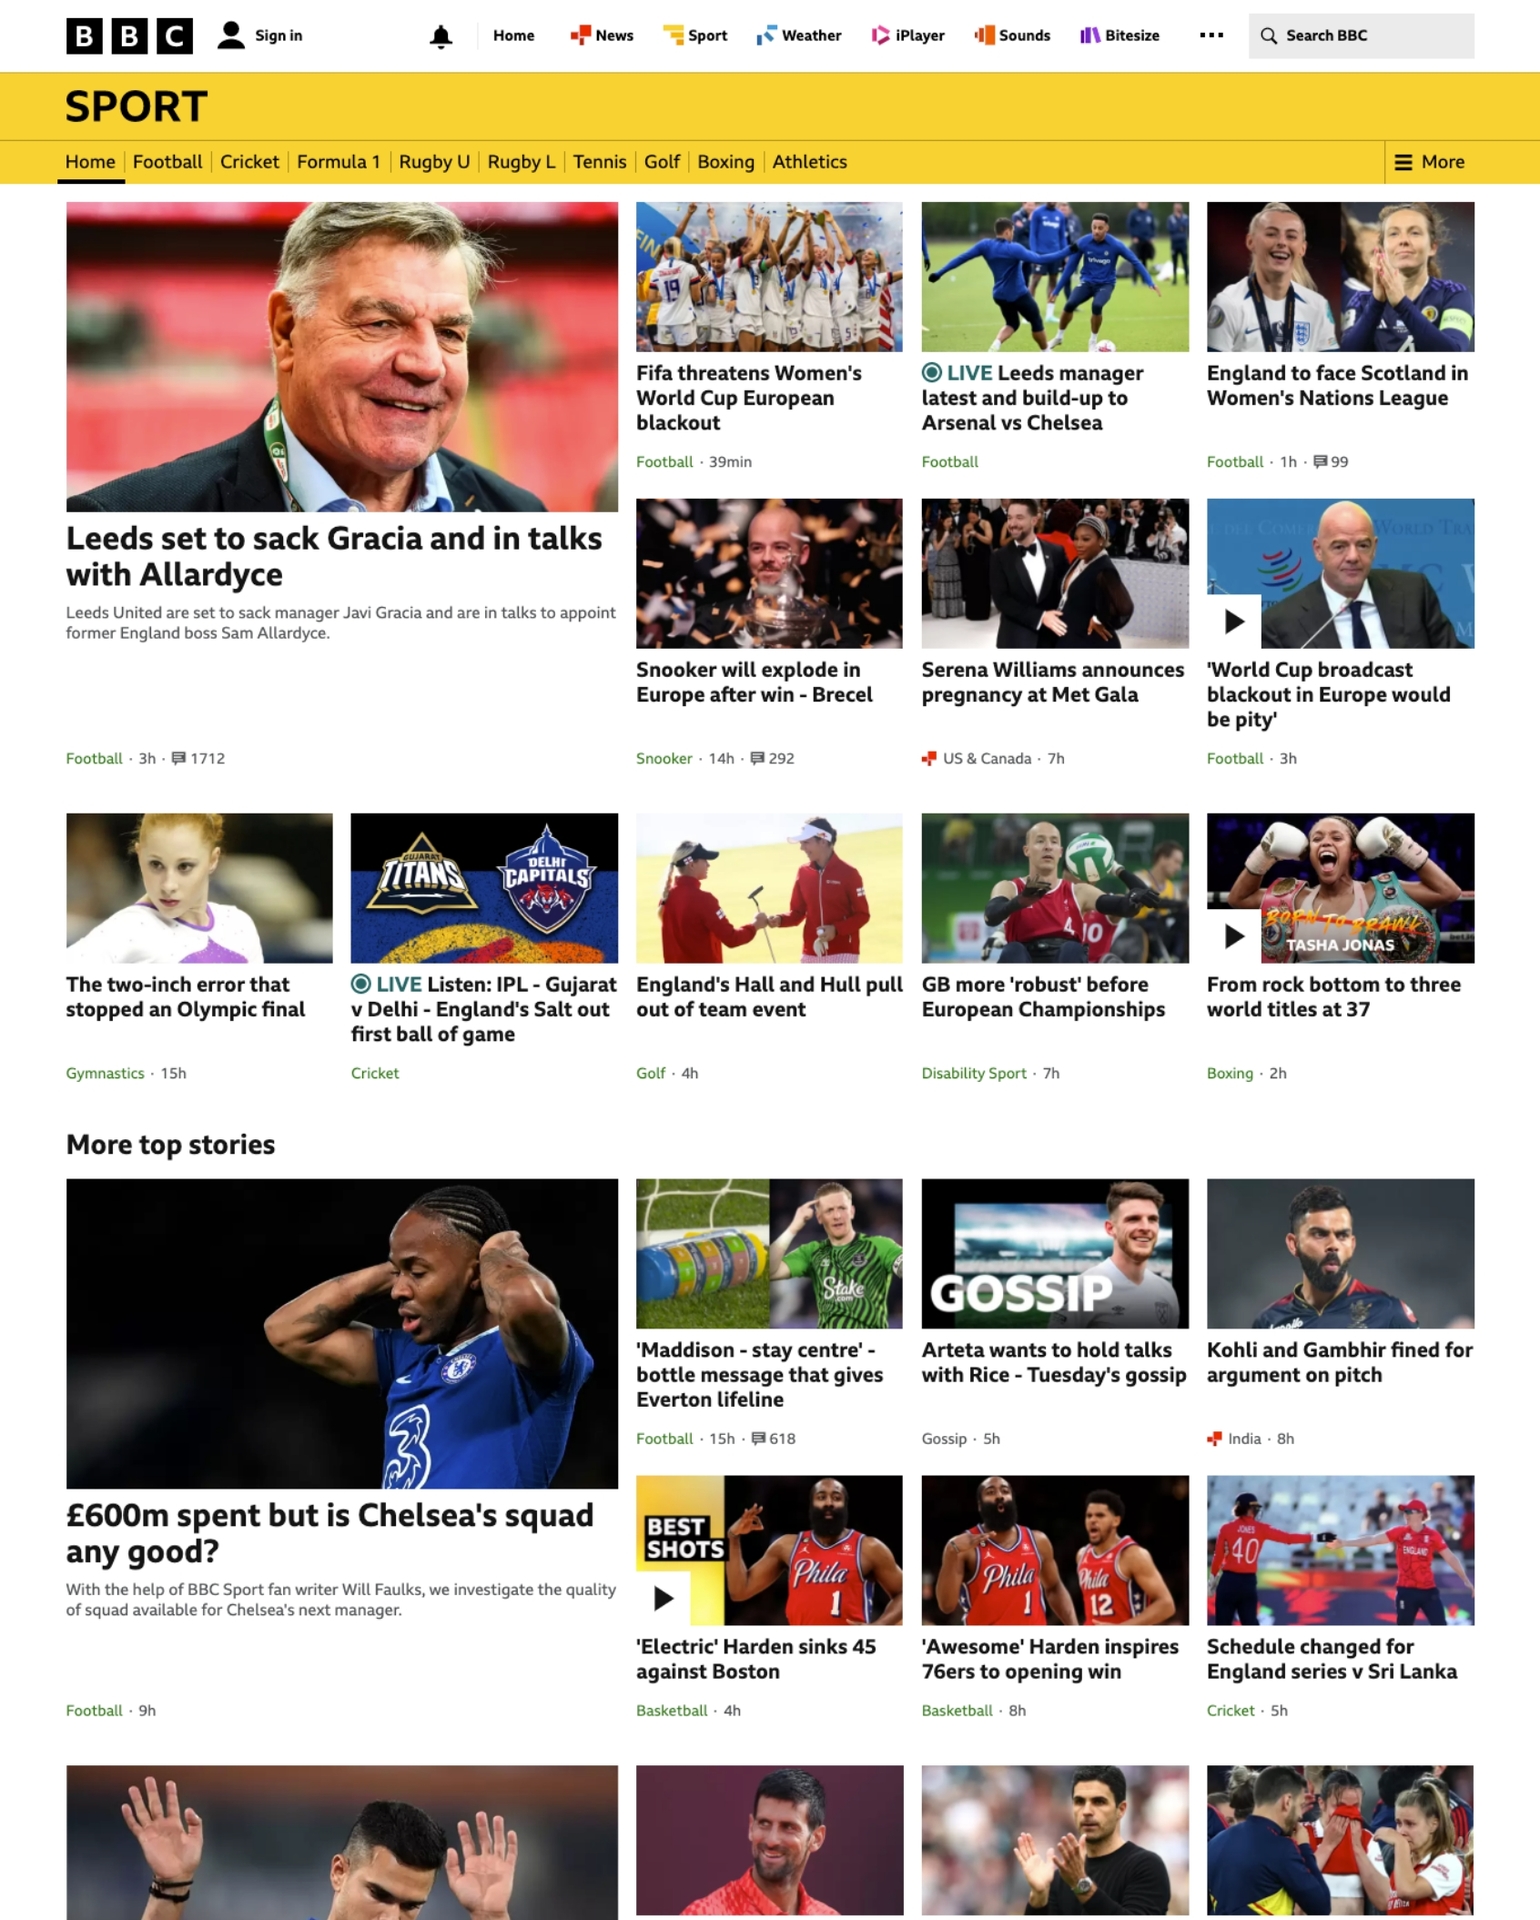 BBC sport website's home page